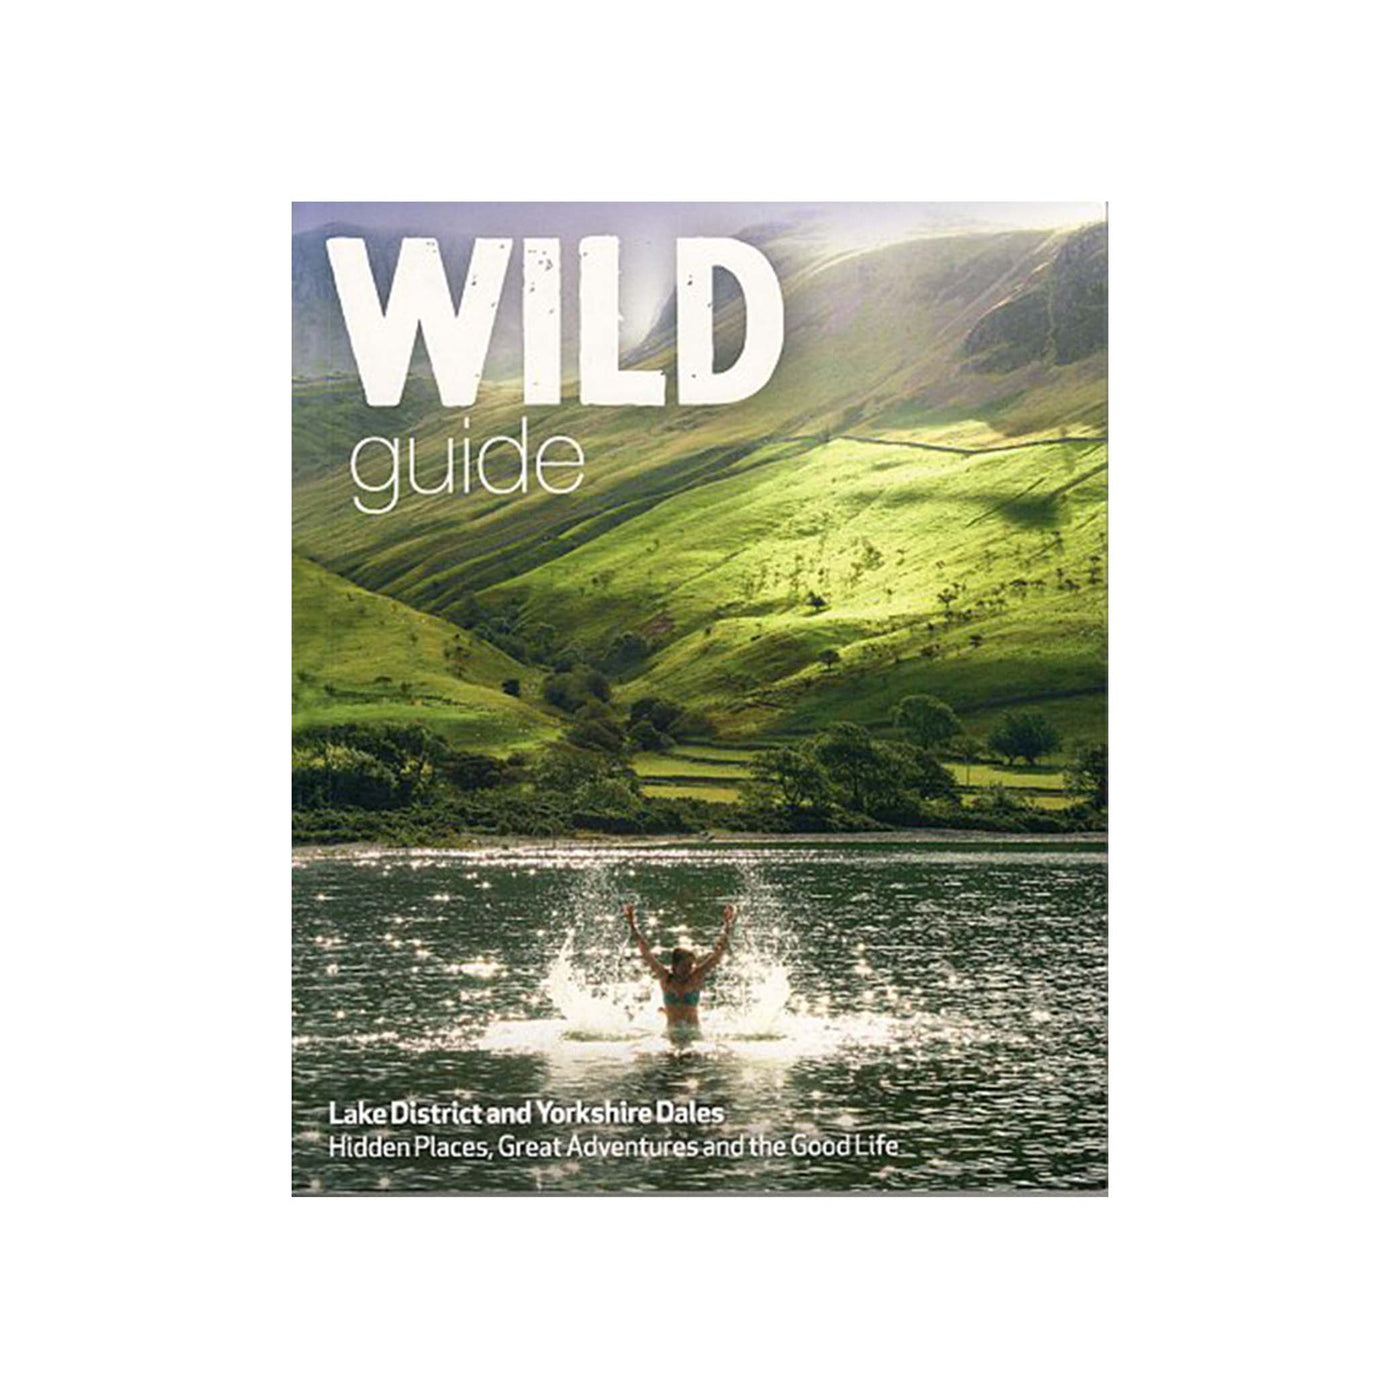 Wild Guide: Lake District and Yorkshire Dales 